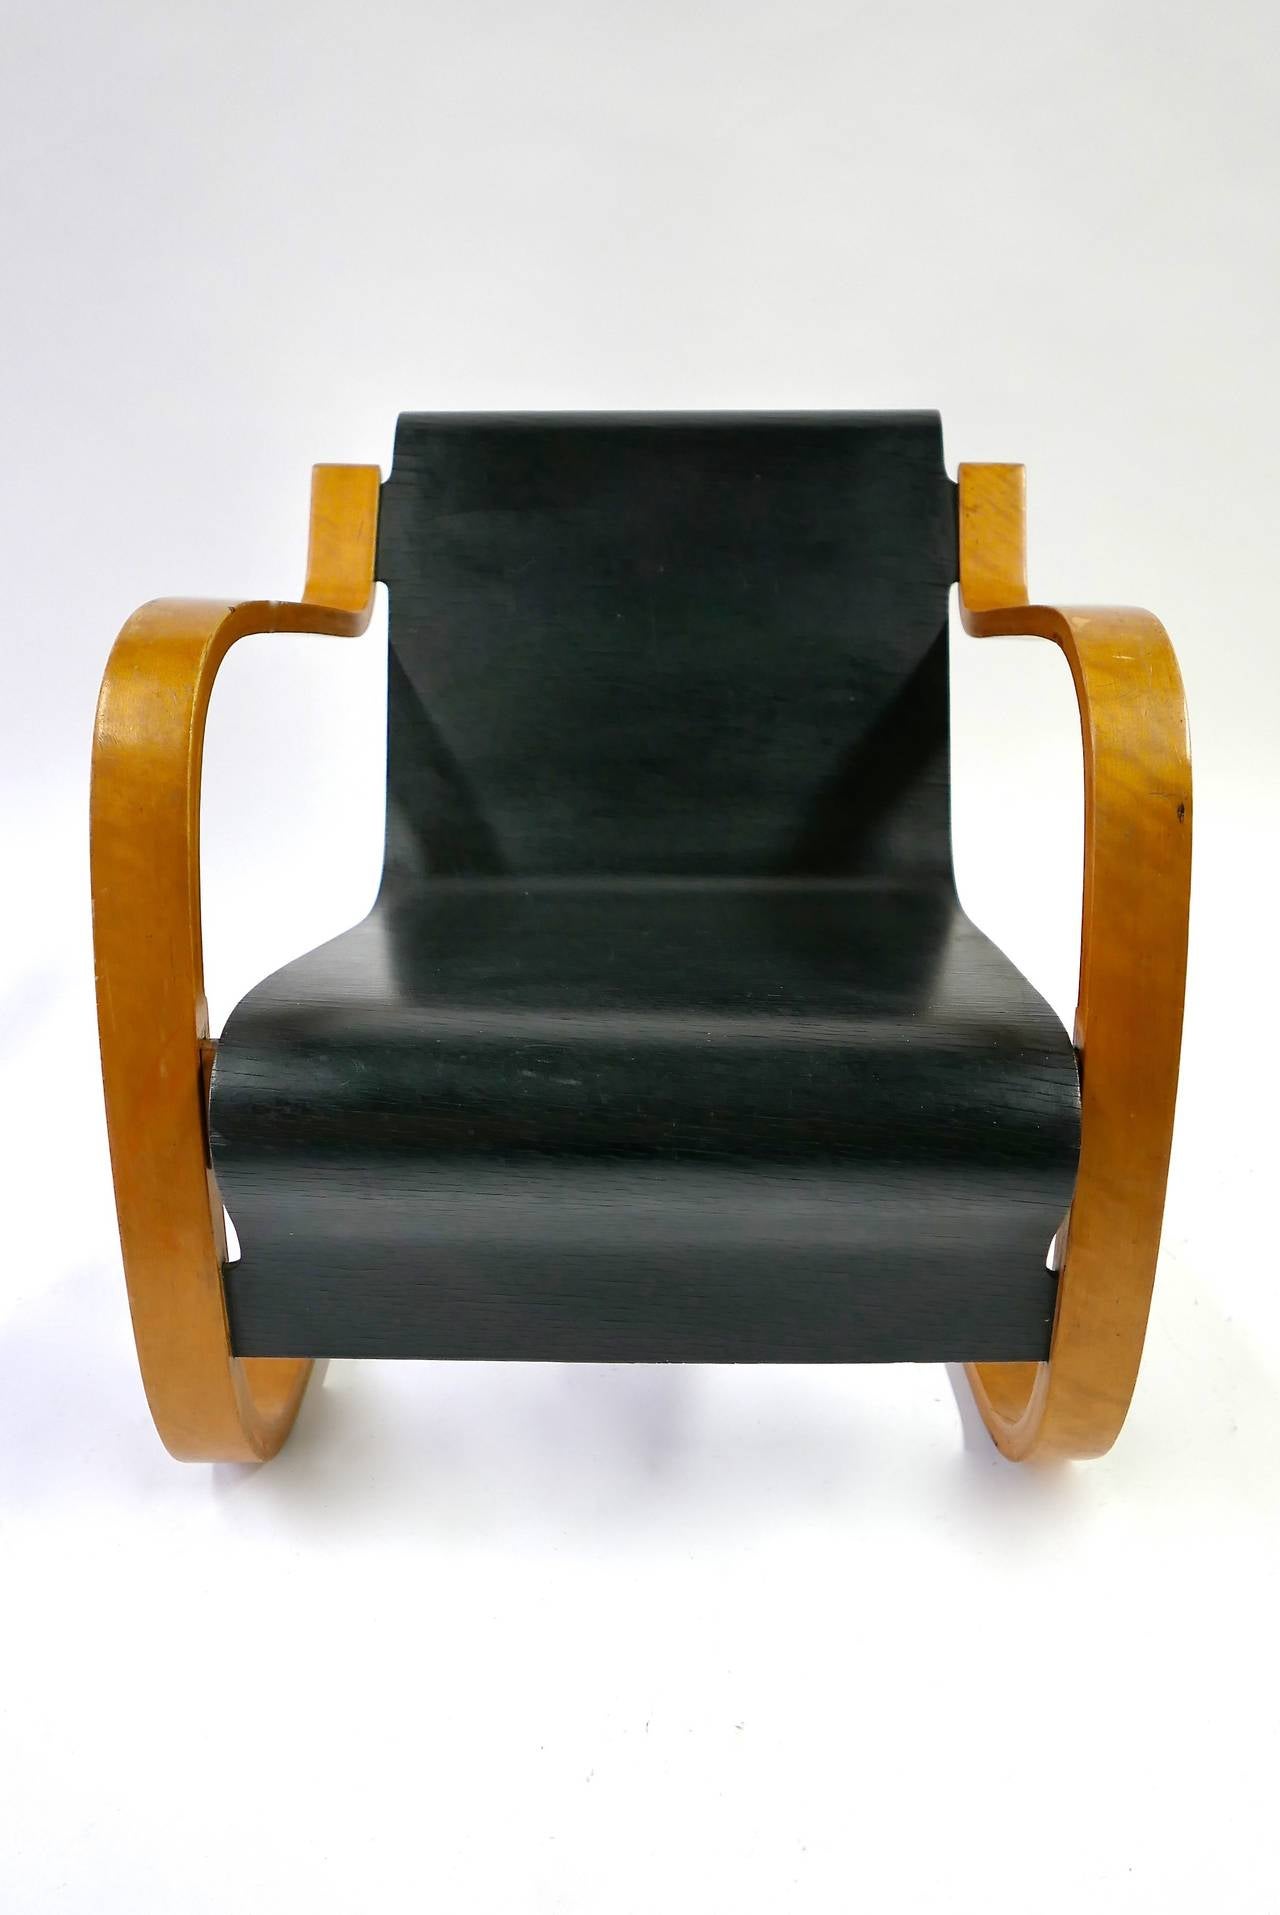 Laminated Alvar Aalto Cantilever Lounge Chair, Model 31/42